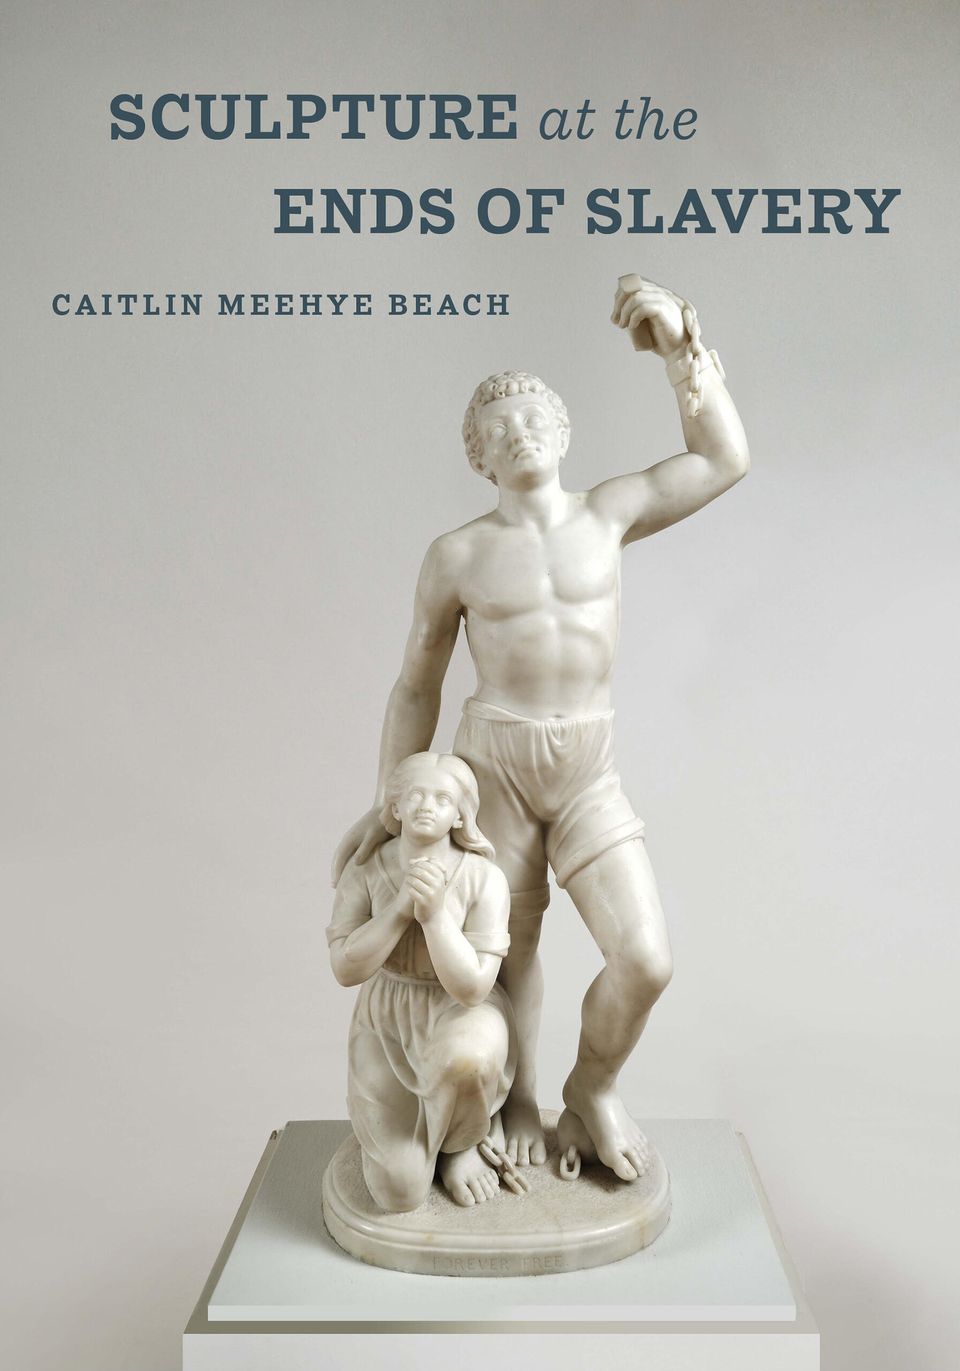 Book cover for Sculpture at the Ends of Slavery by Caitlin Meehye Beach